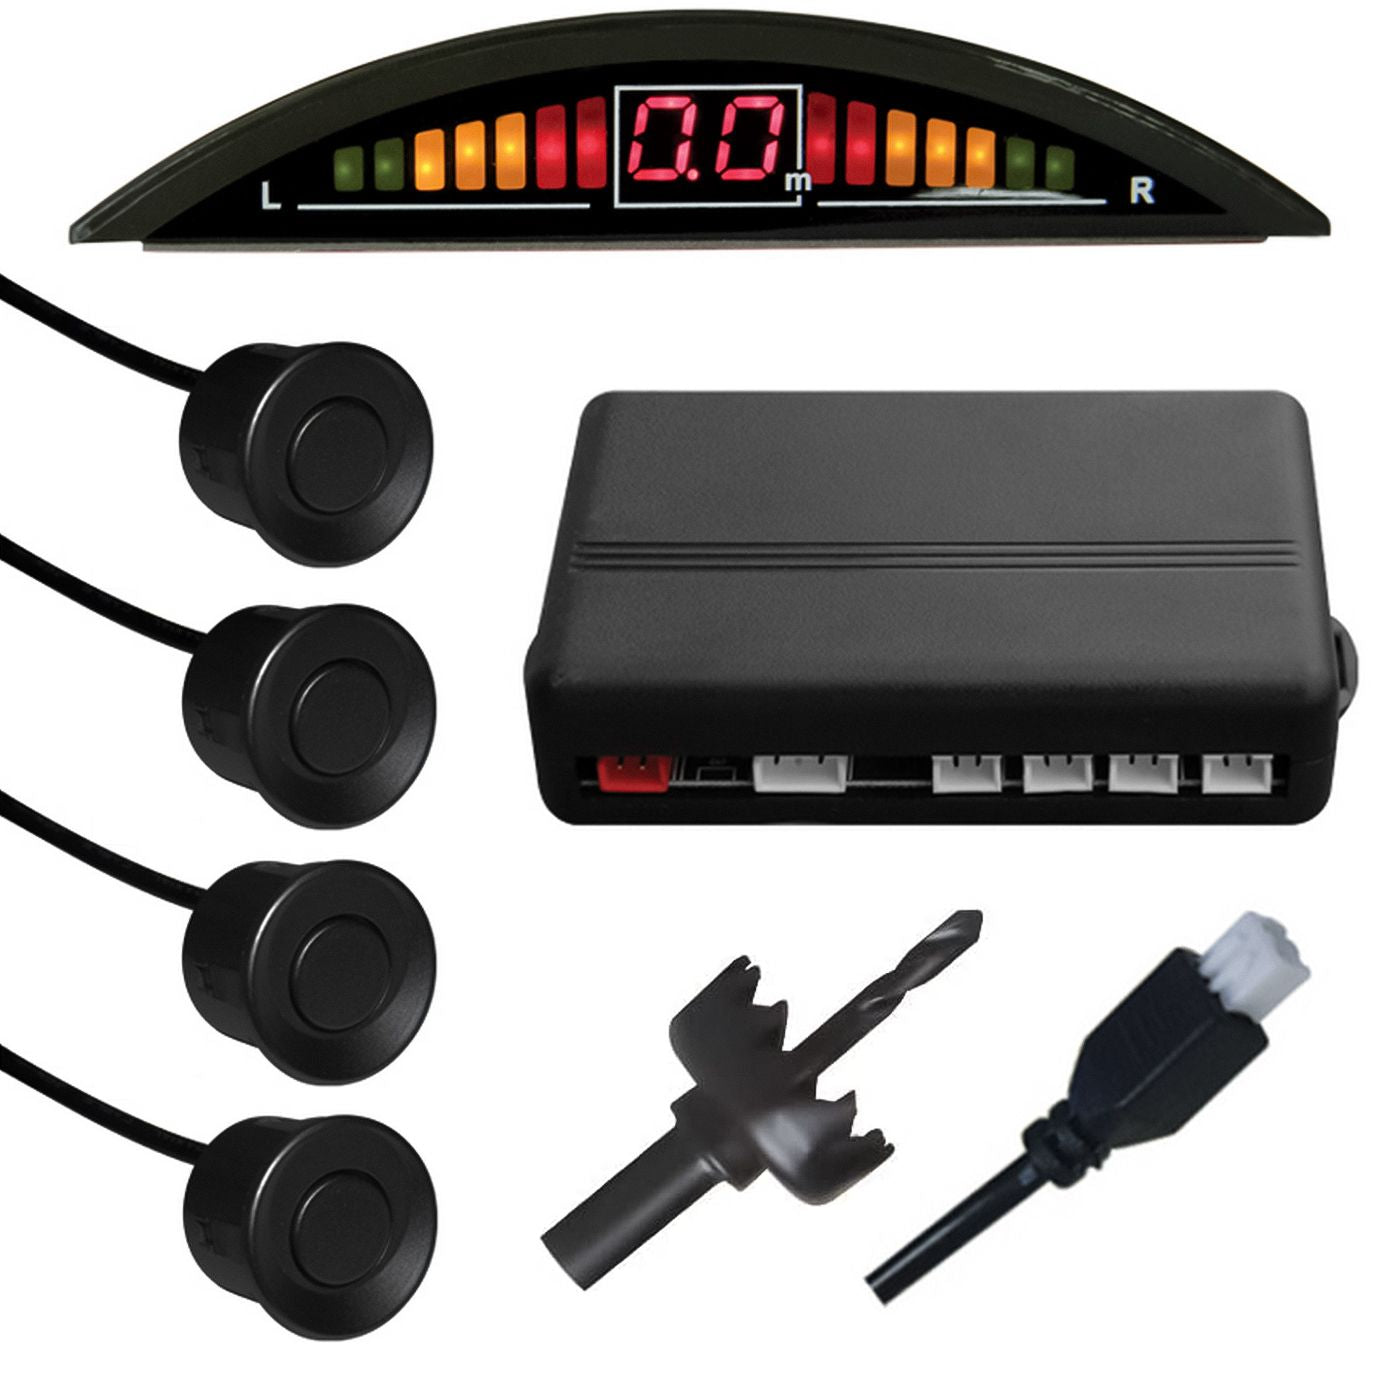 Alcapower 970051 Kit of 4 reverse parking sensors, digital display with LED indicators and acoustic warning, 15 meter cable, integrated control unit